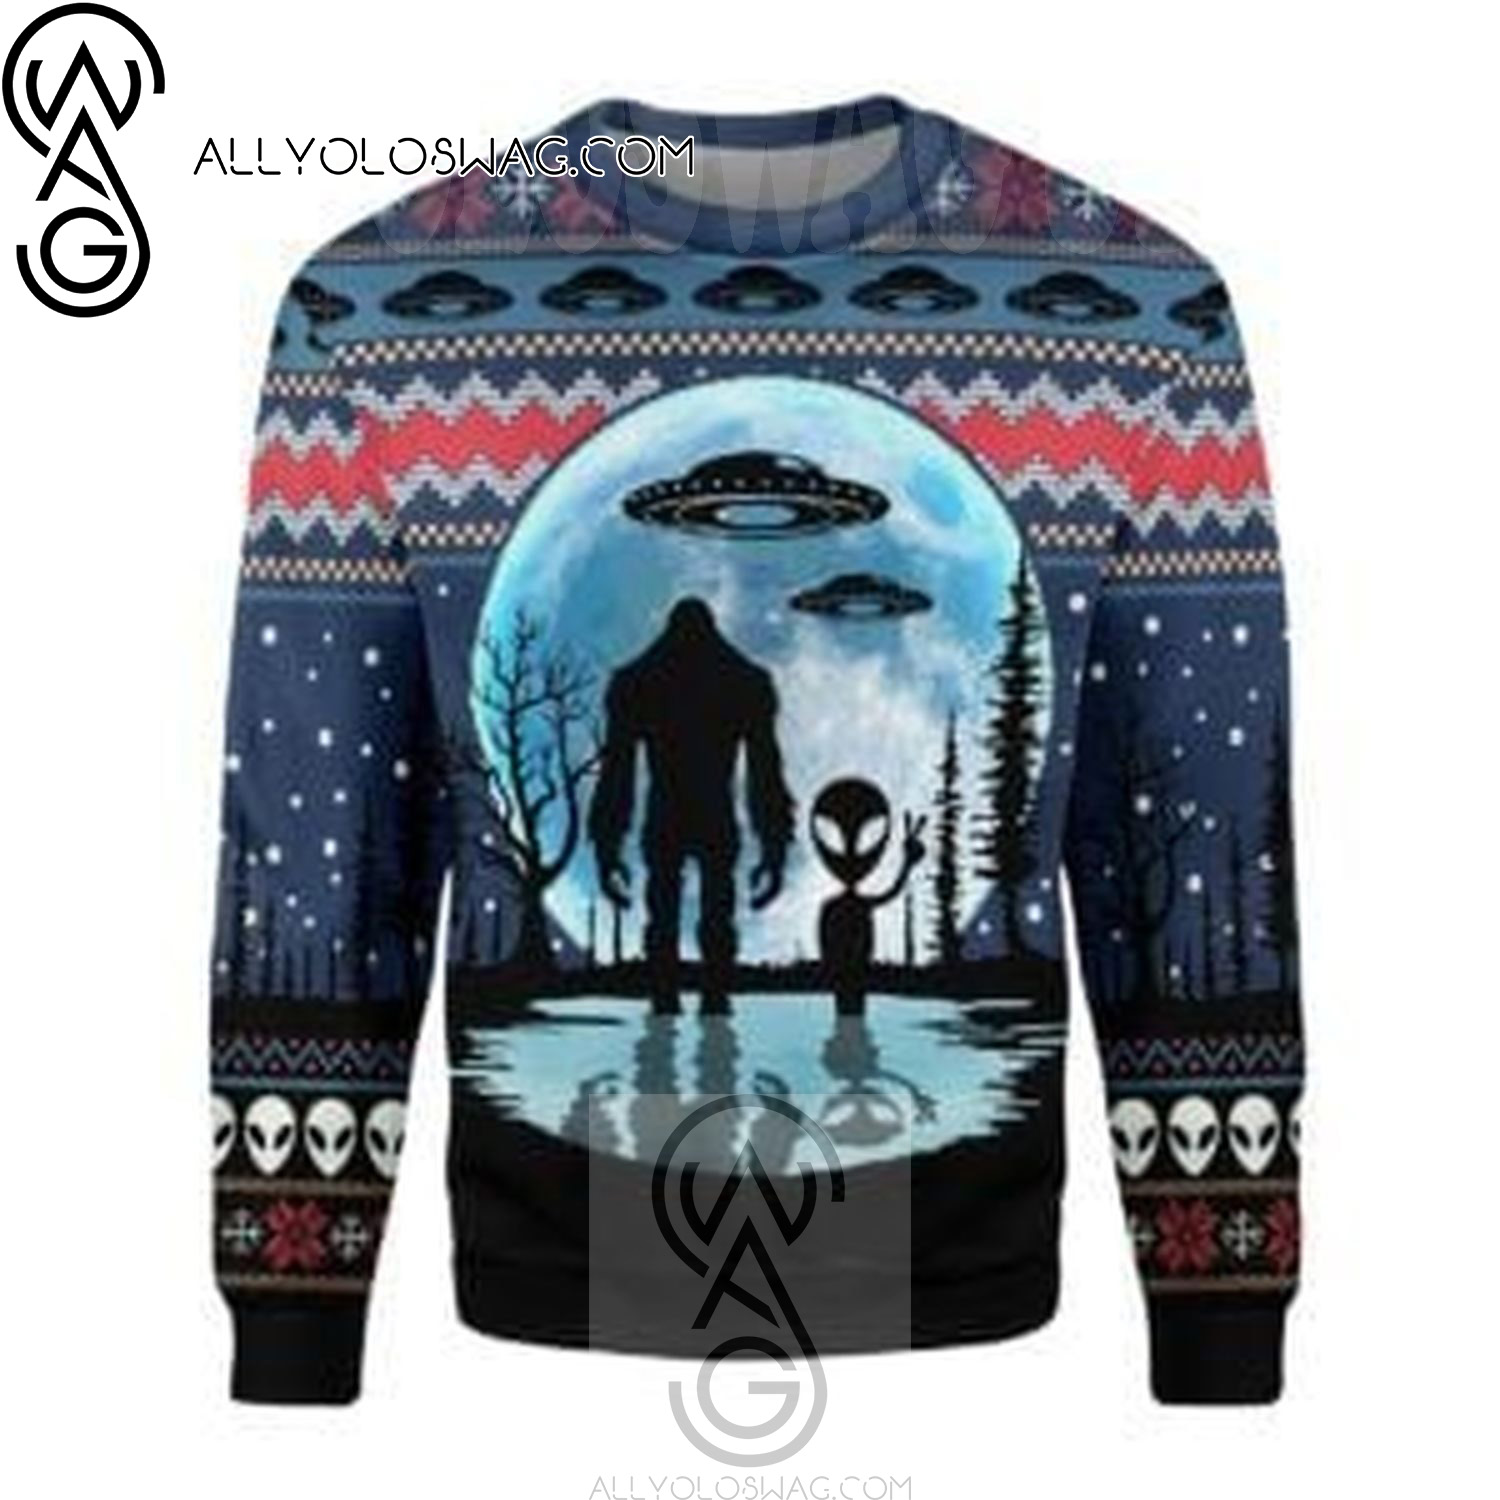 Bigfoot Alien UFO For Bigfoot Lovers Holiday Party Ugly Christmas Sweater